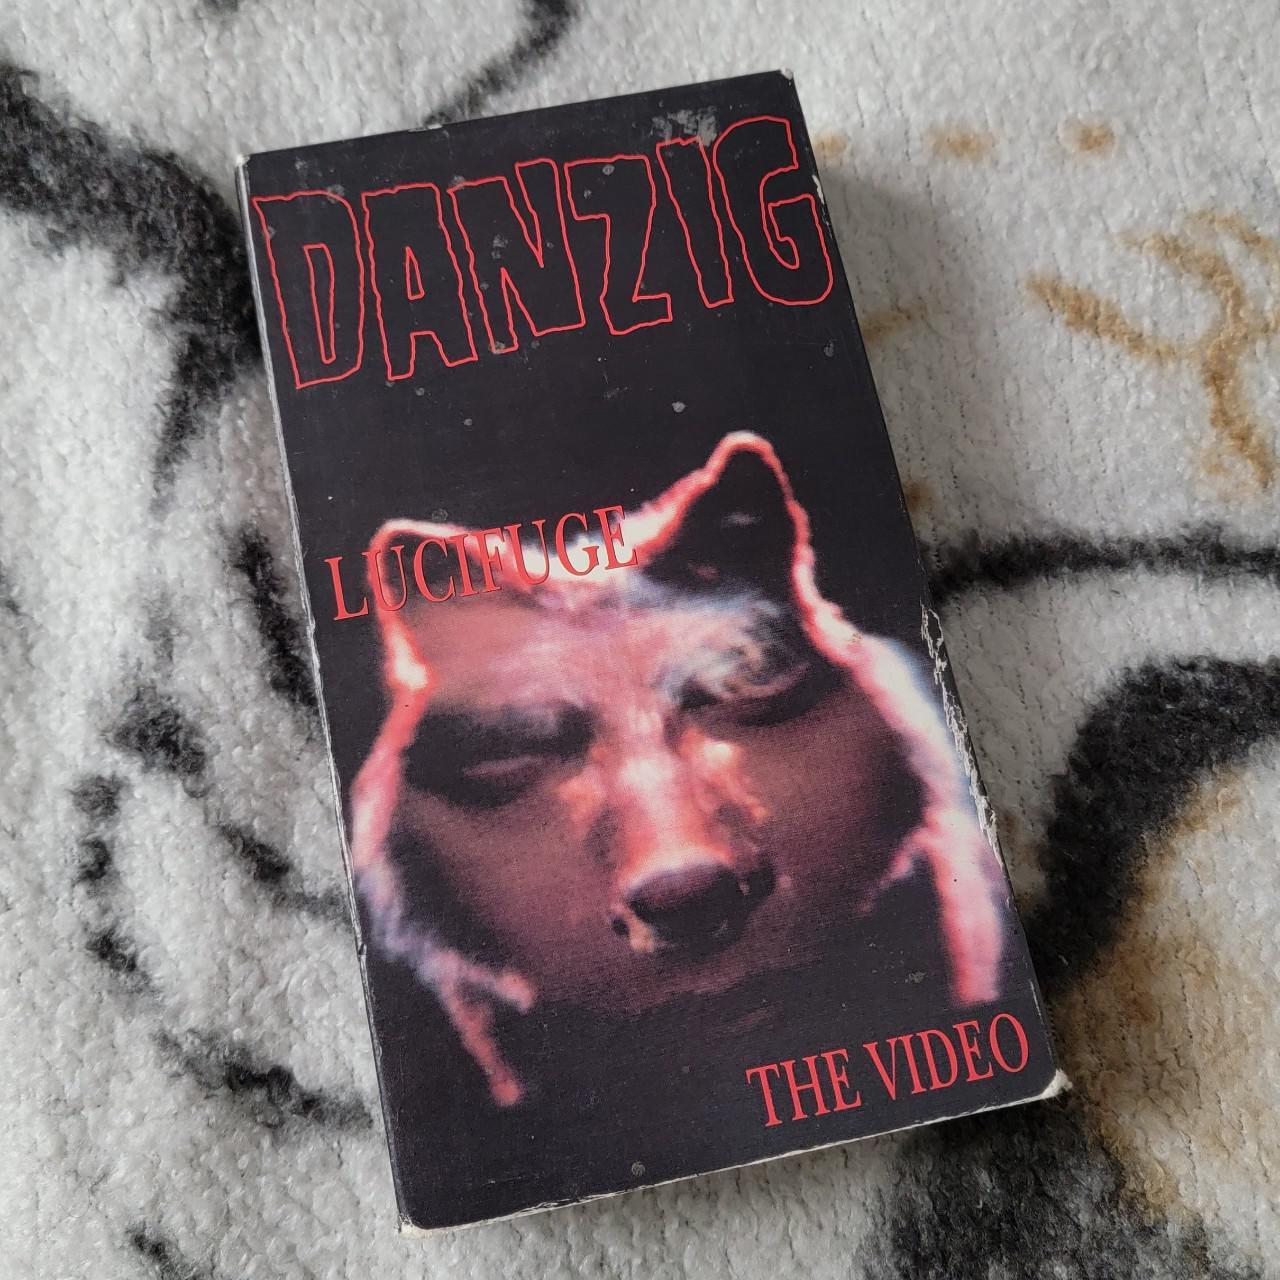 Product Image 1 - Danzig "Lucifuge" VHS Tape

Brand -